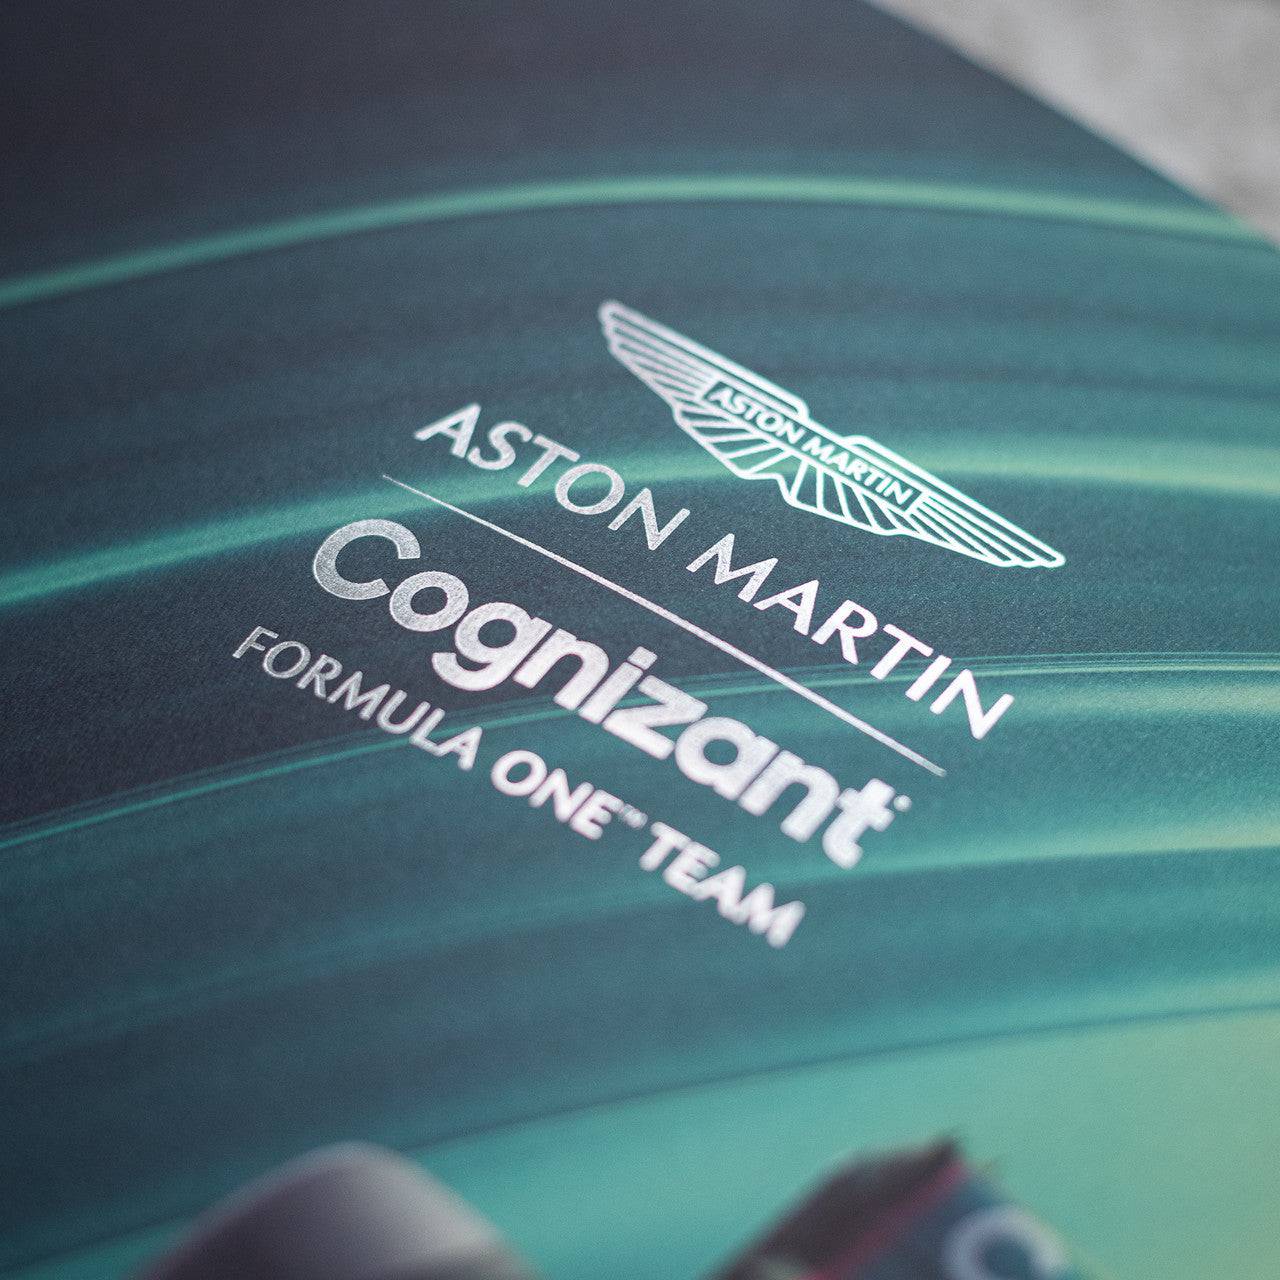 Aston Martin Cognizant Formula One™ Team - Lance Stroll - 2021 | Collector’s Edition | Unique Numbers